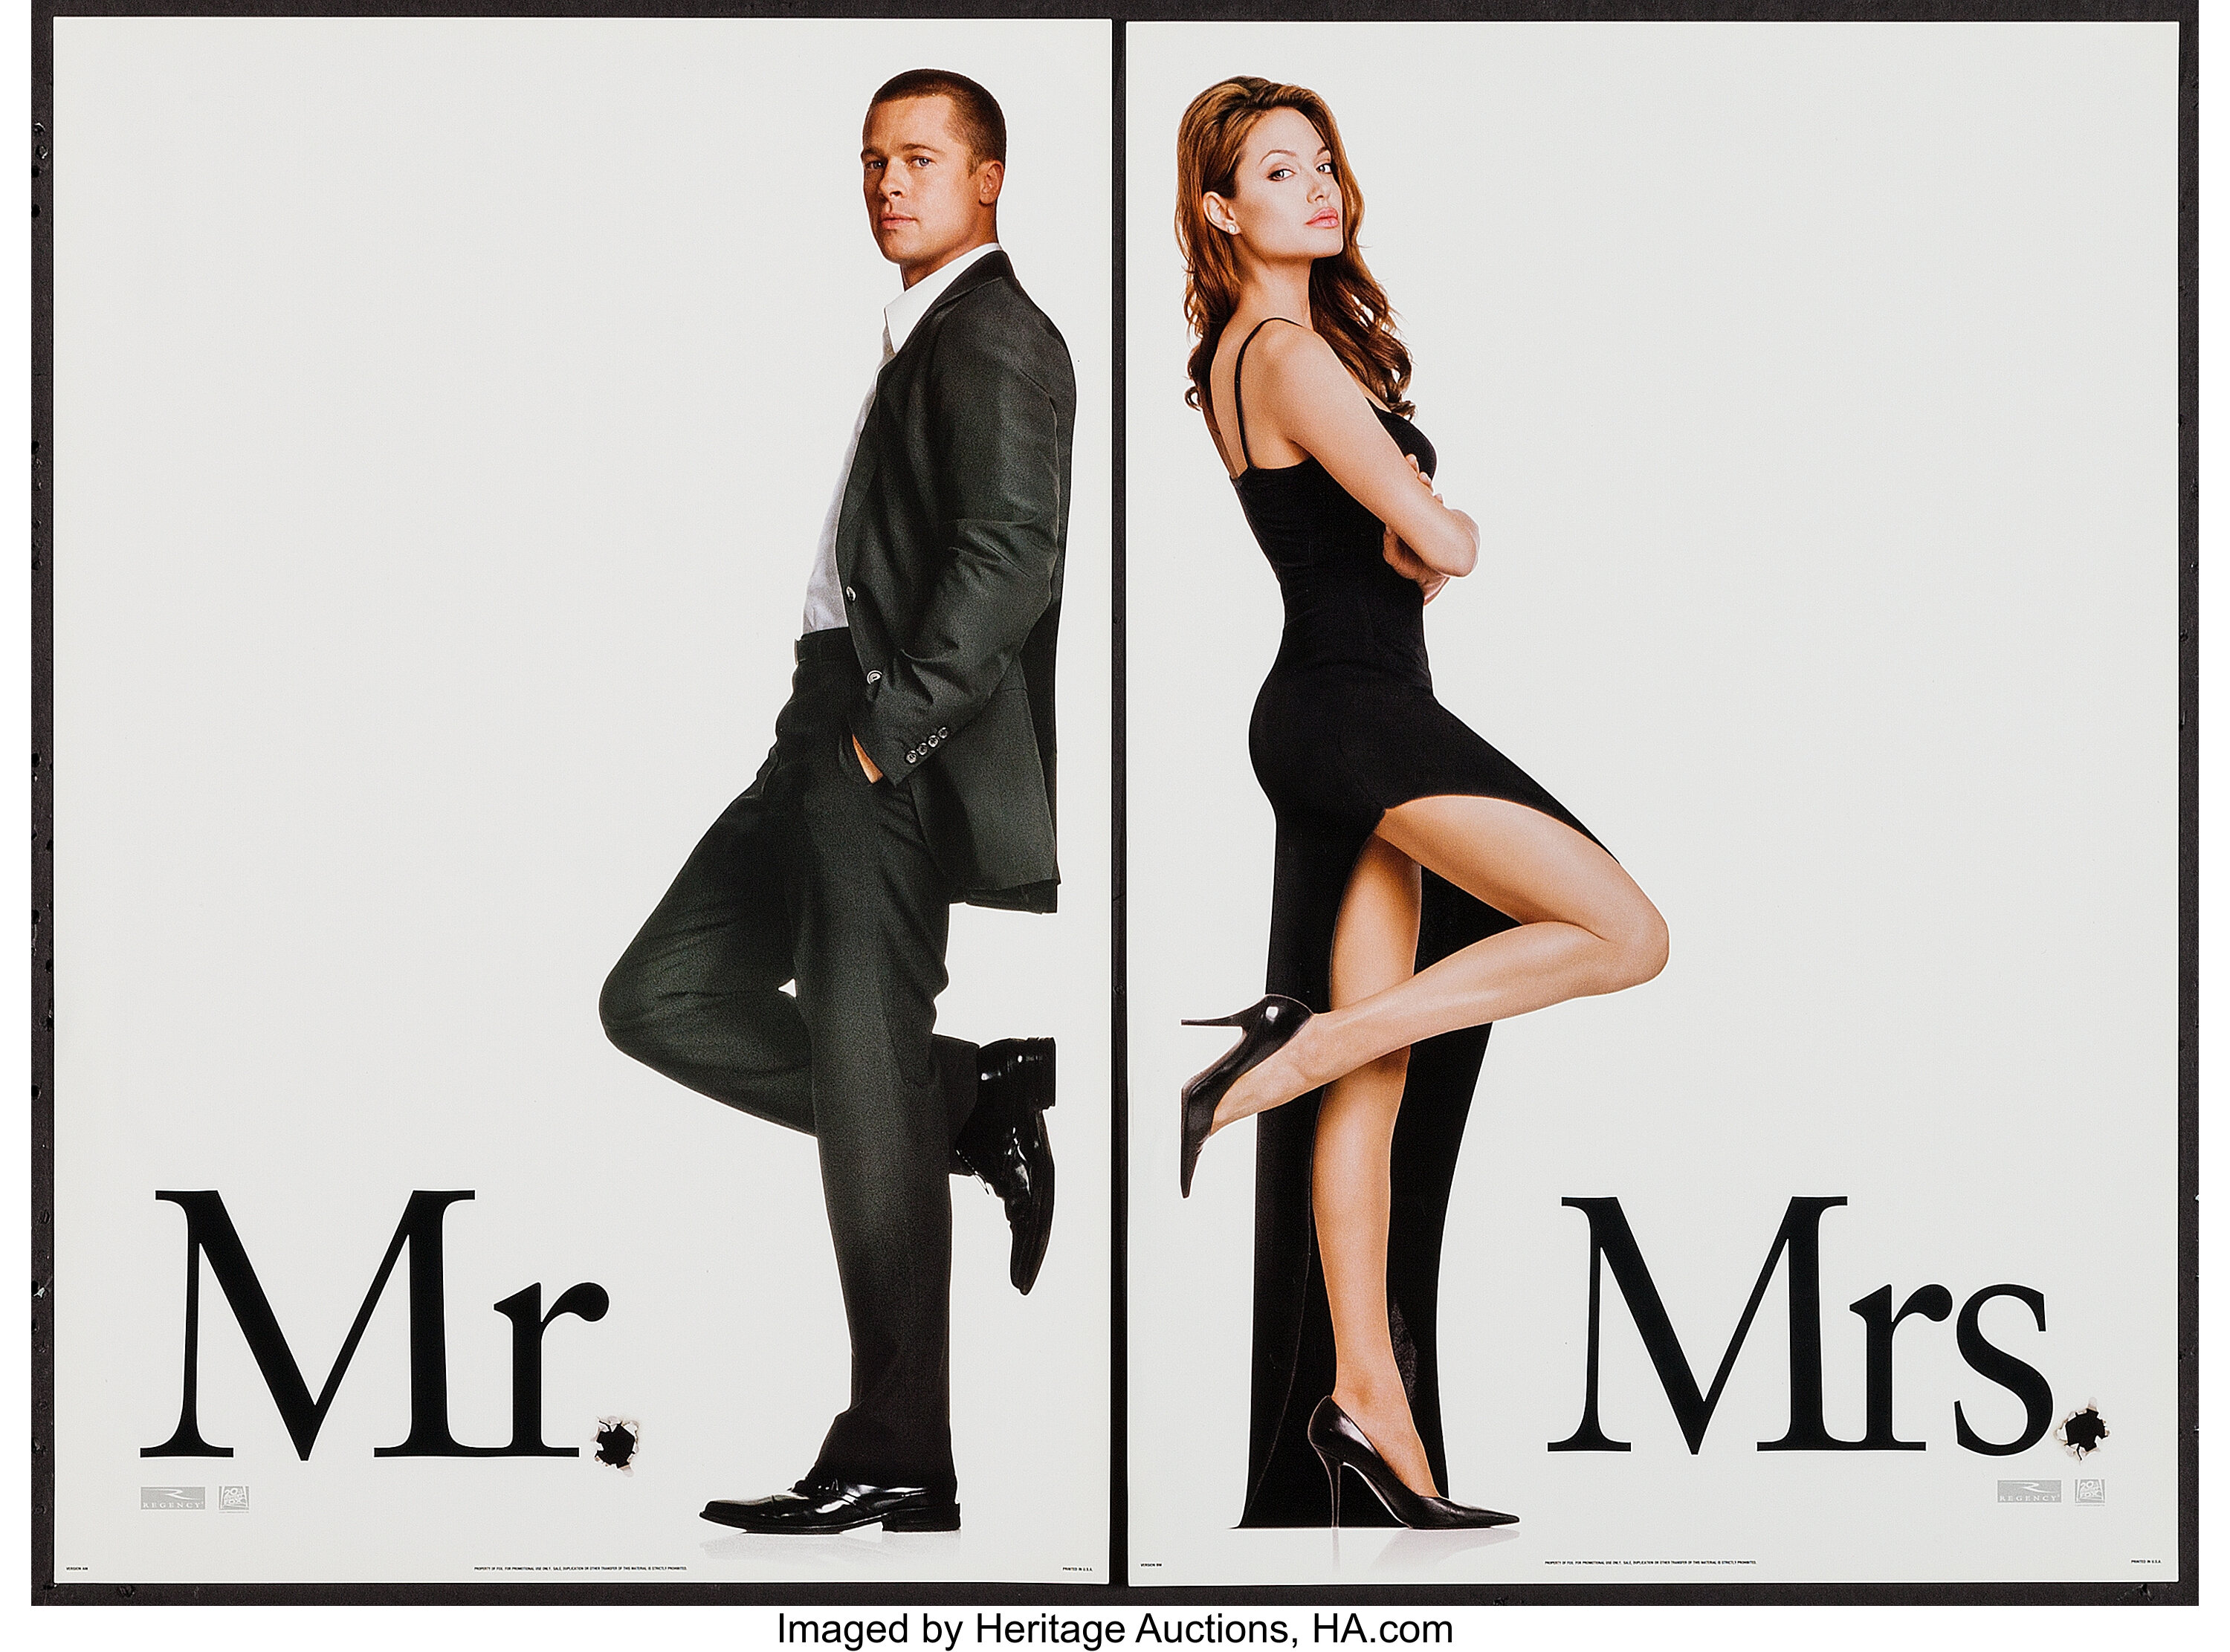 mr and mrs smith 2005 poster